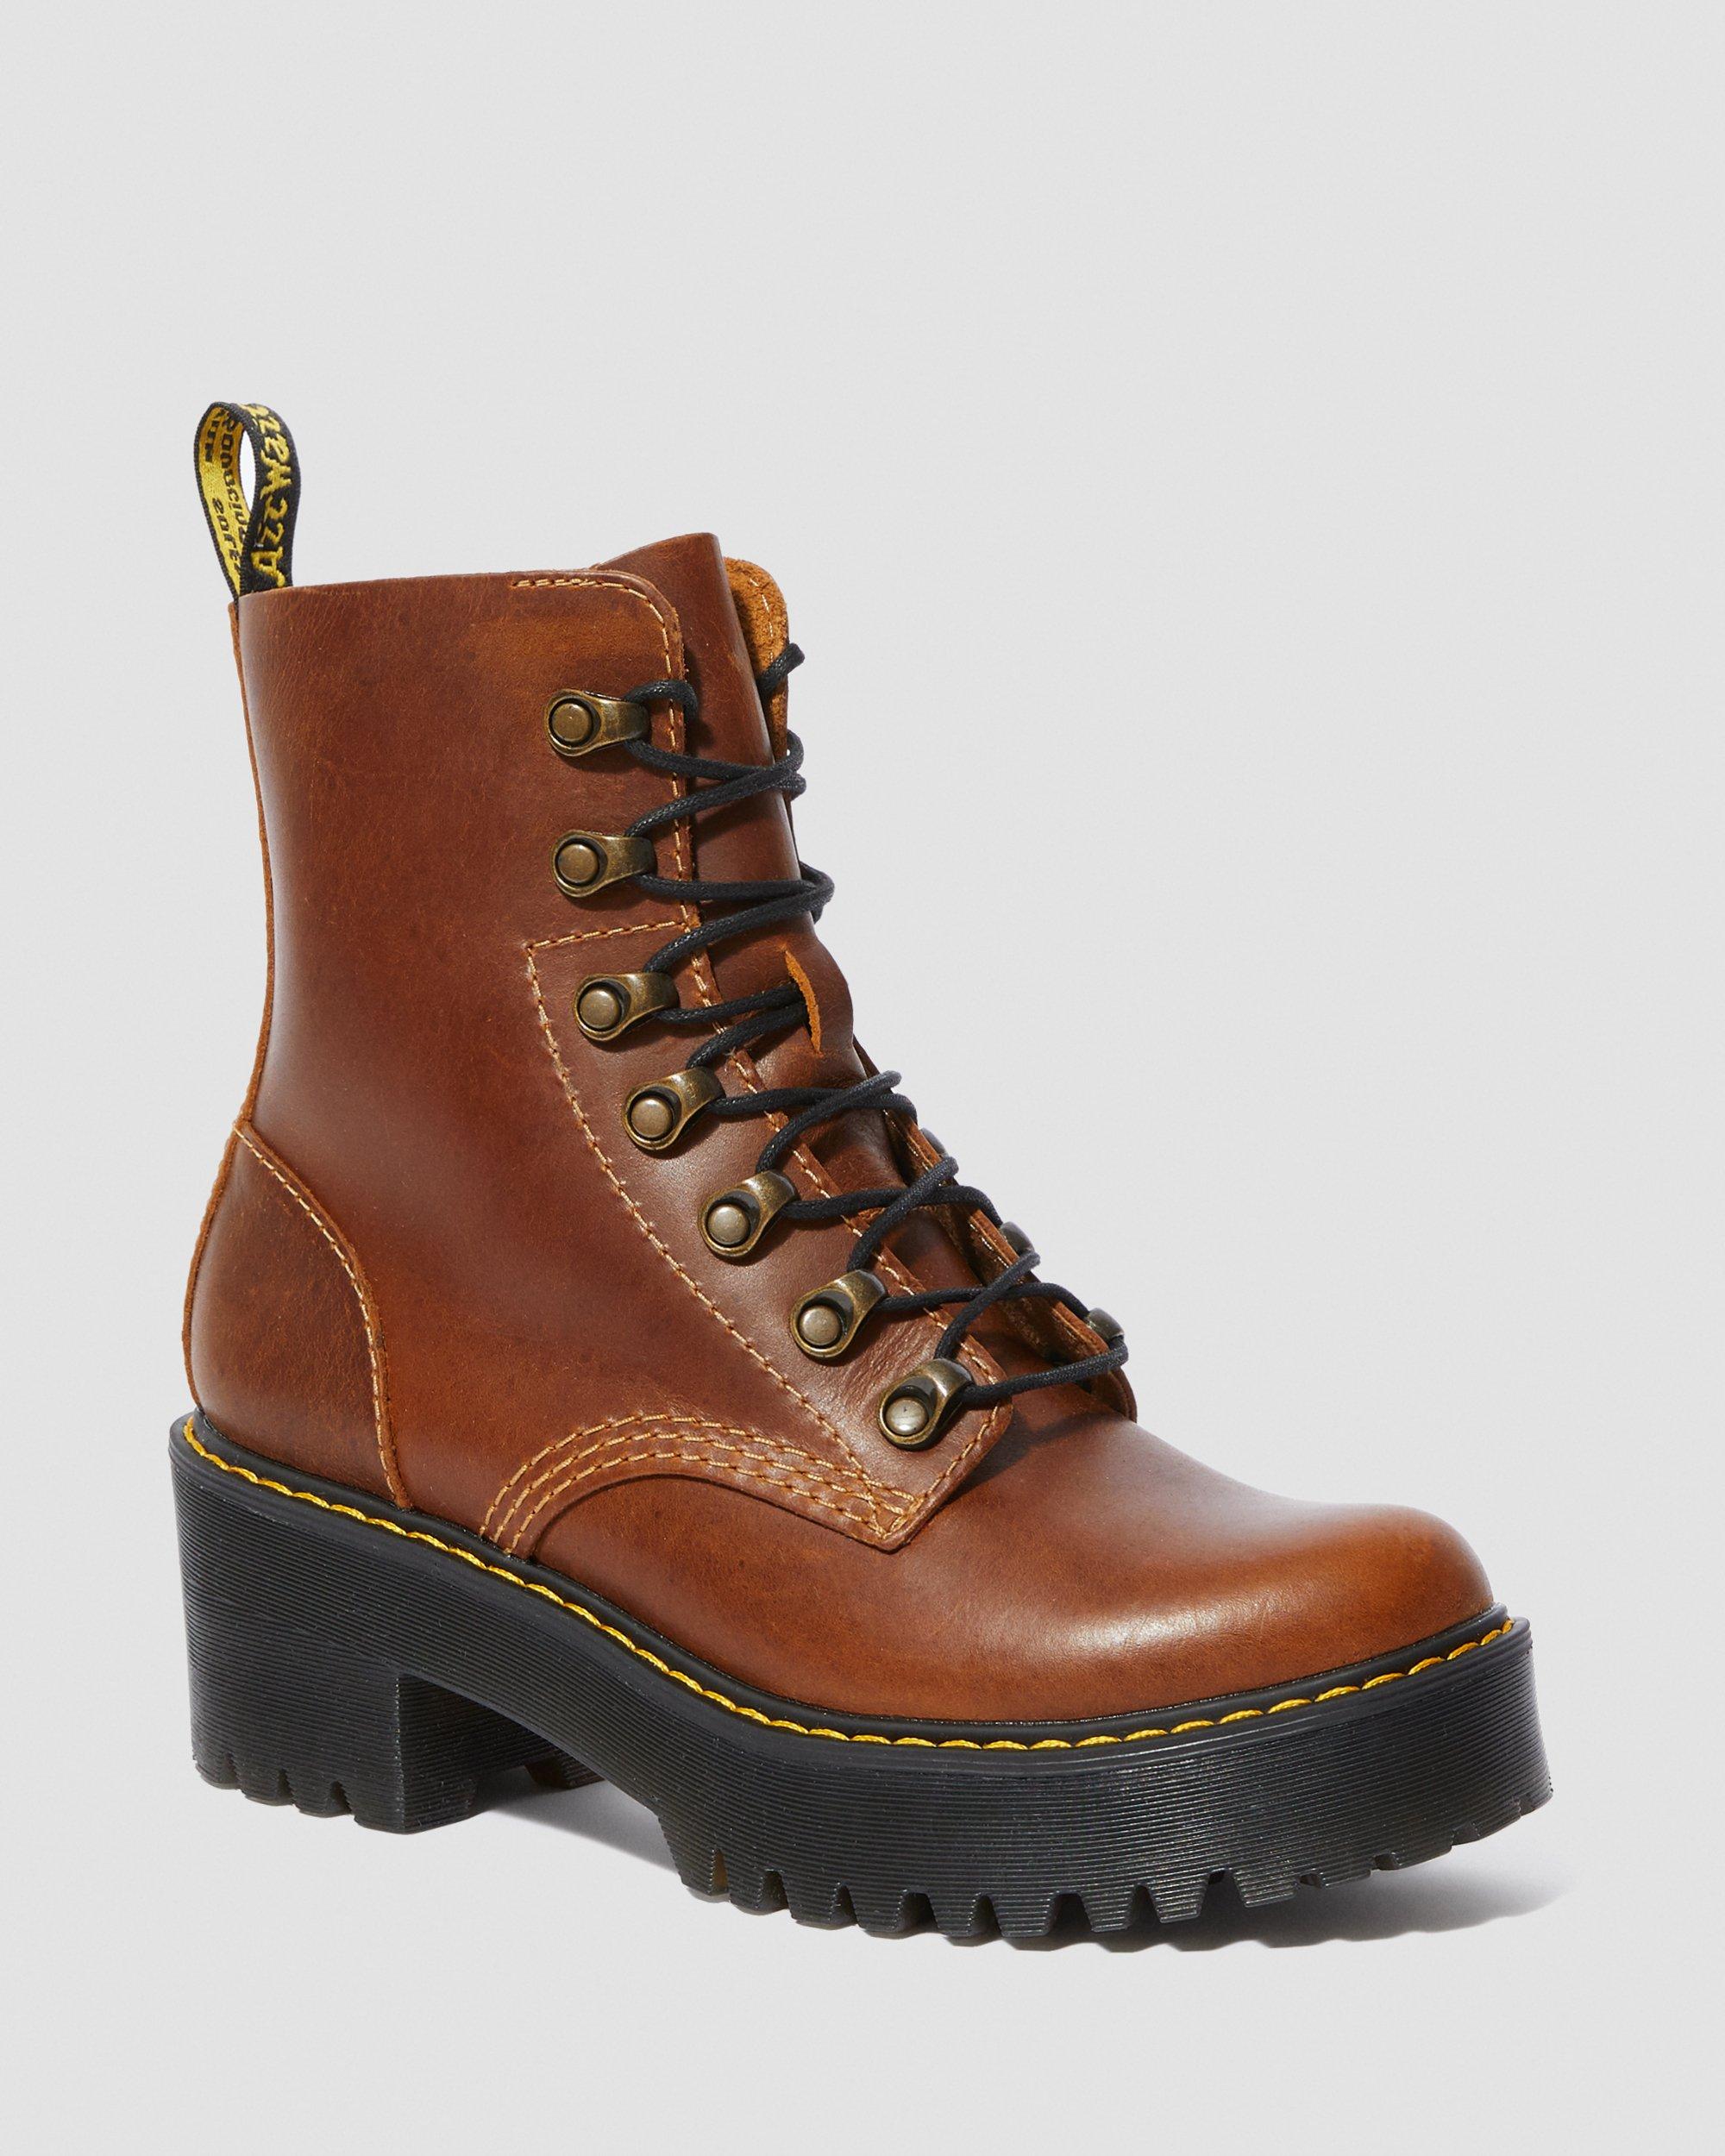 leather boots sale womens uk